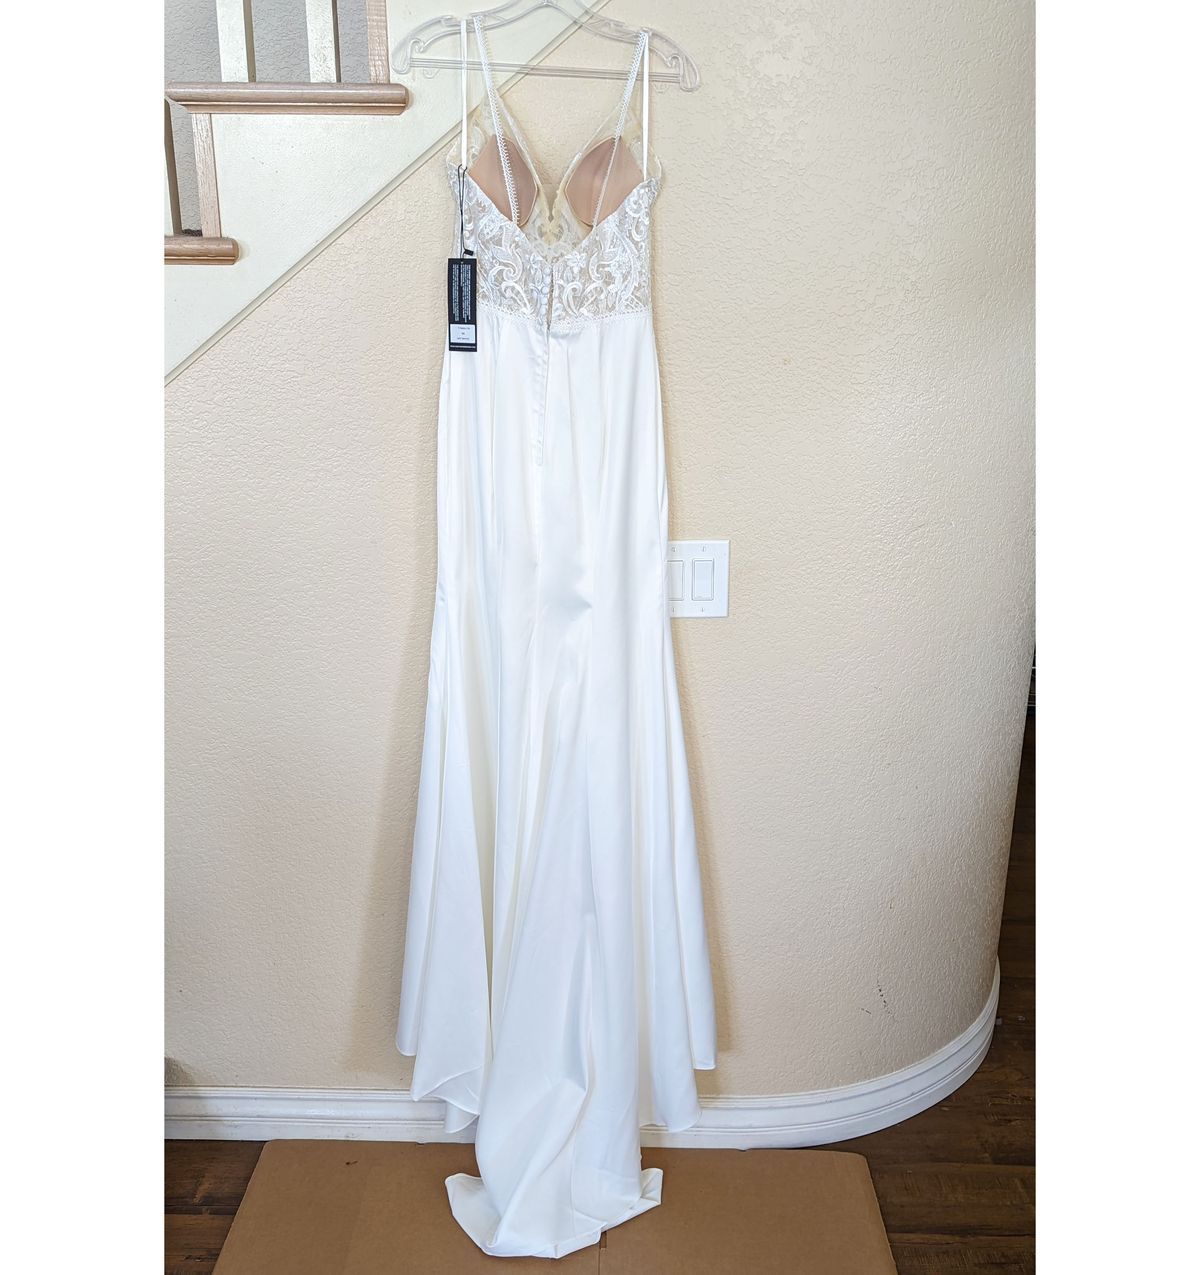 Style Off White Filigree Sequin Sweetheart Neck Mermaid Wedding Gown Bicici & Coty Size 2 Wedding Satin White Mermaid Dress on Queenly